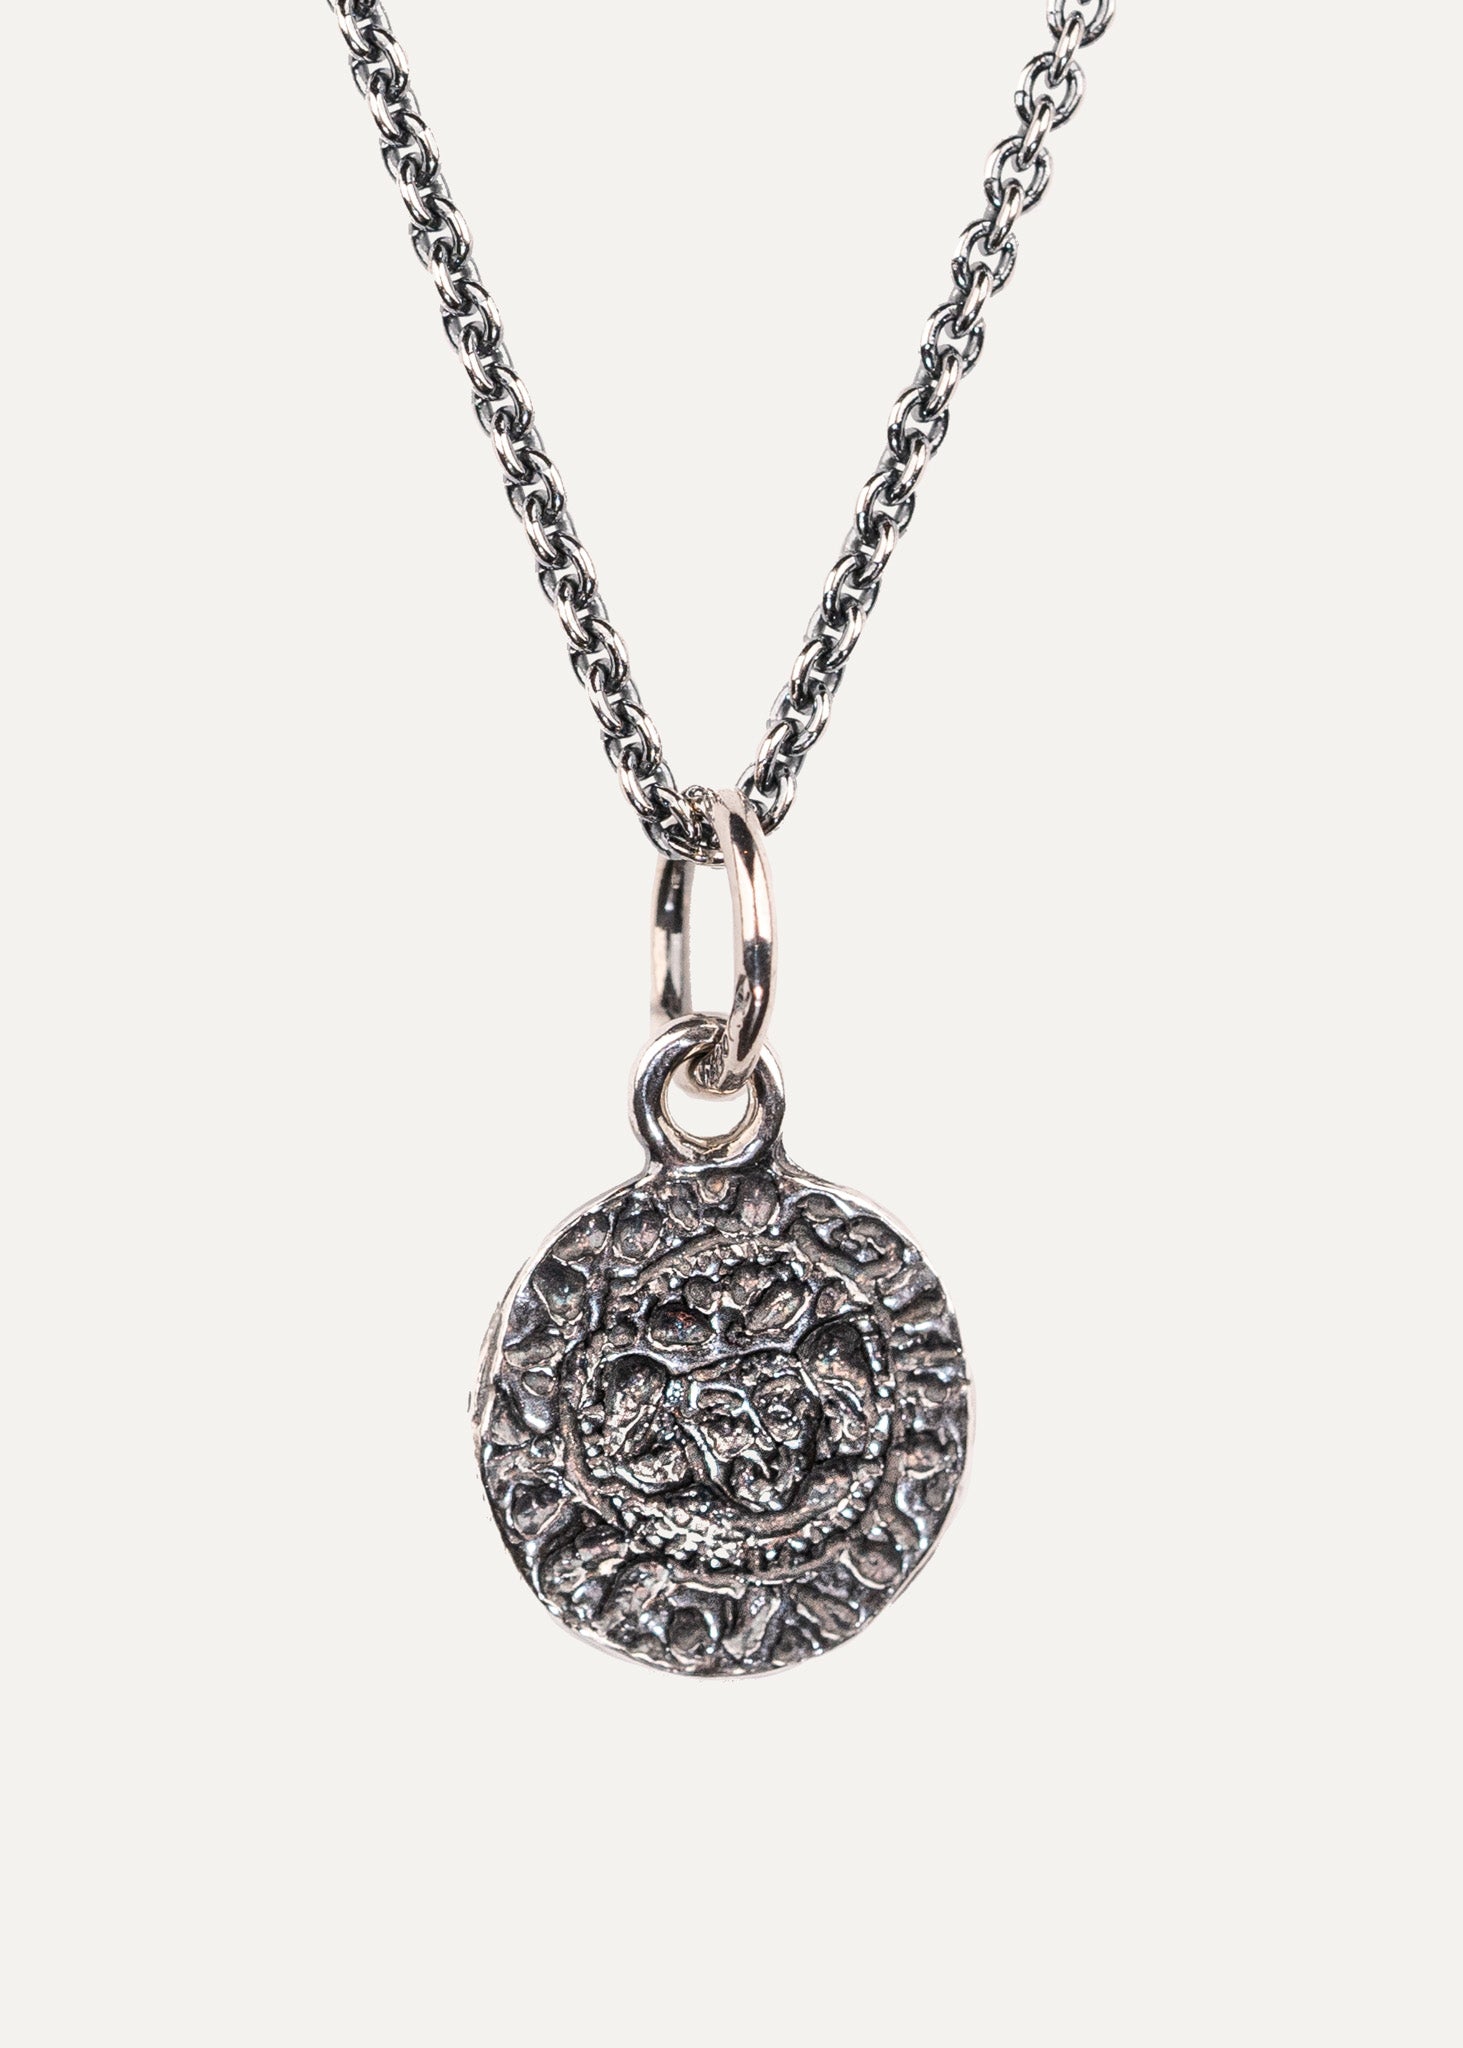 Quarter penny necklace in oxidized silver